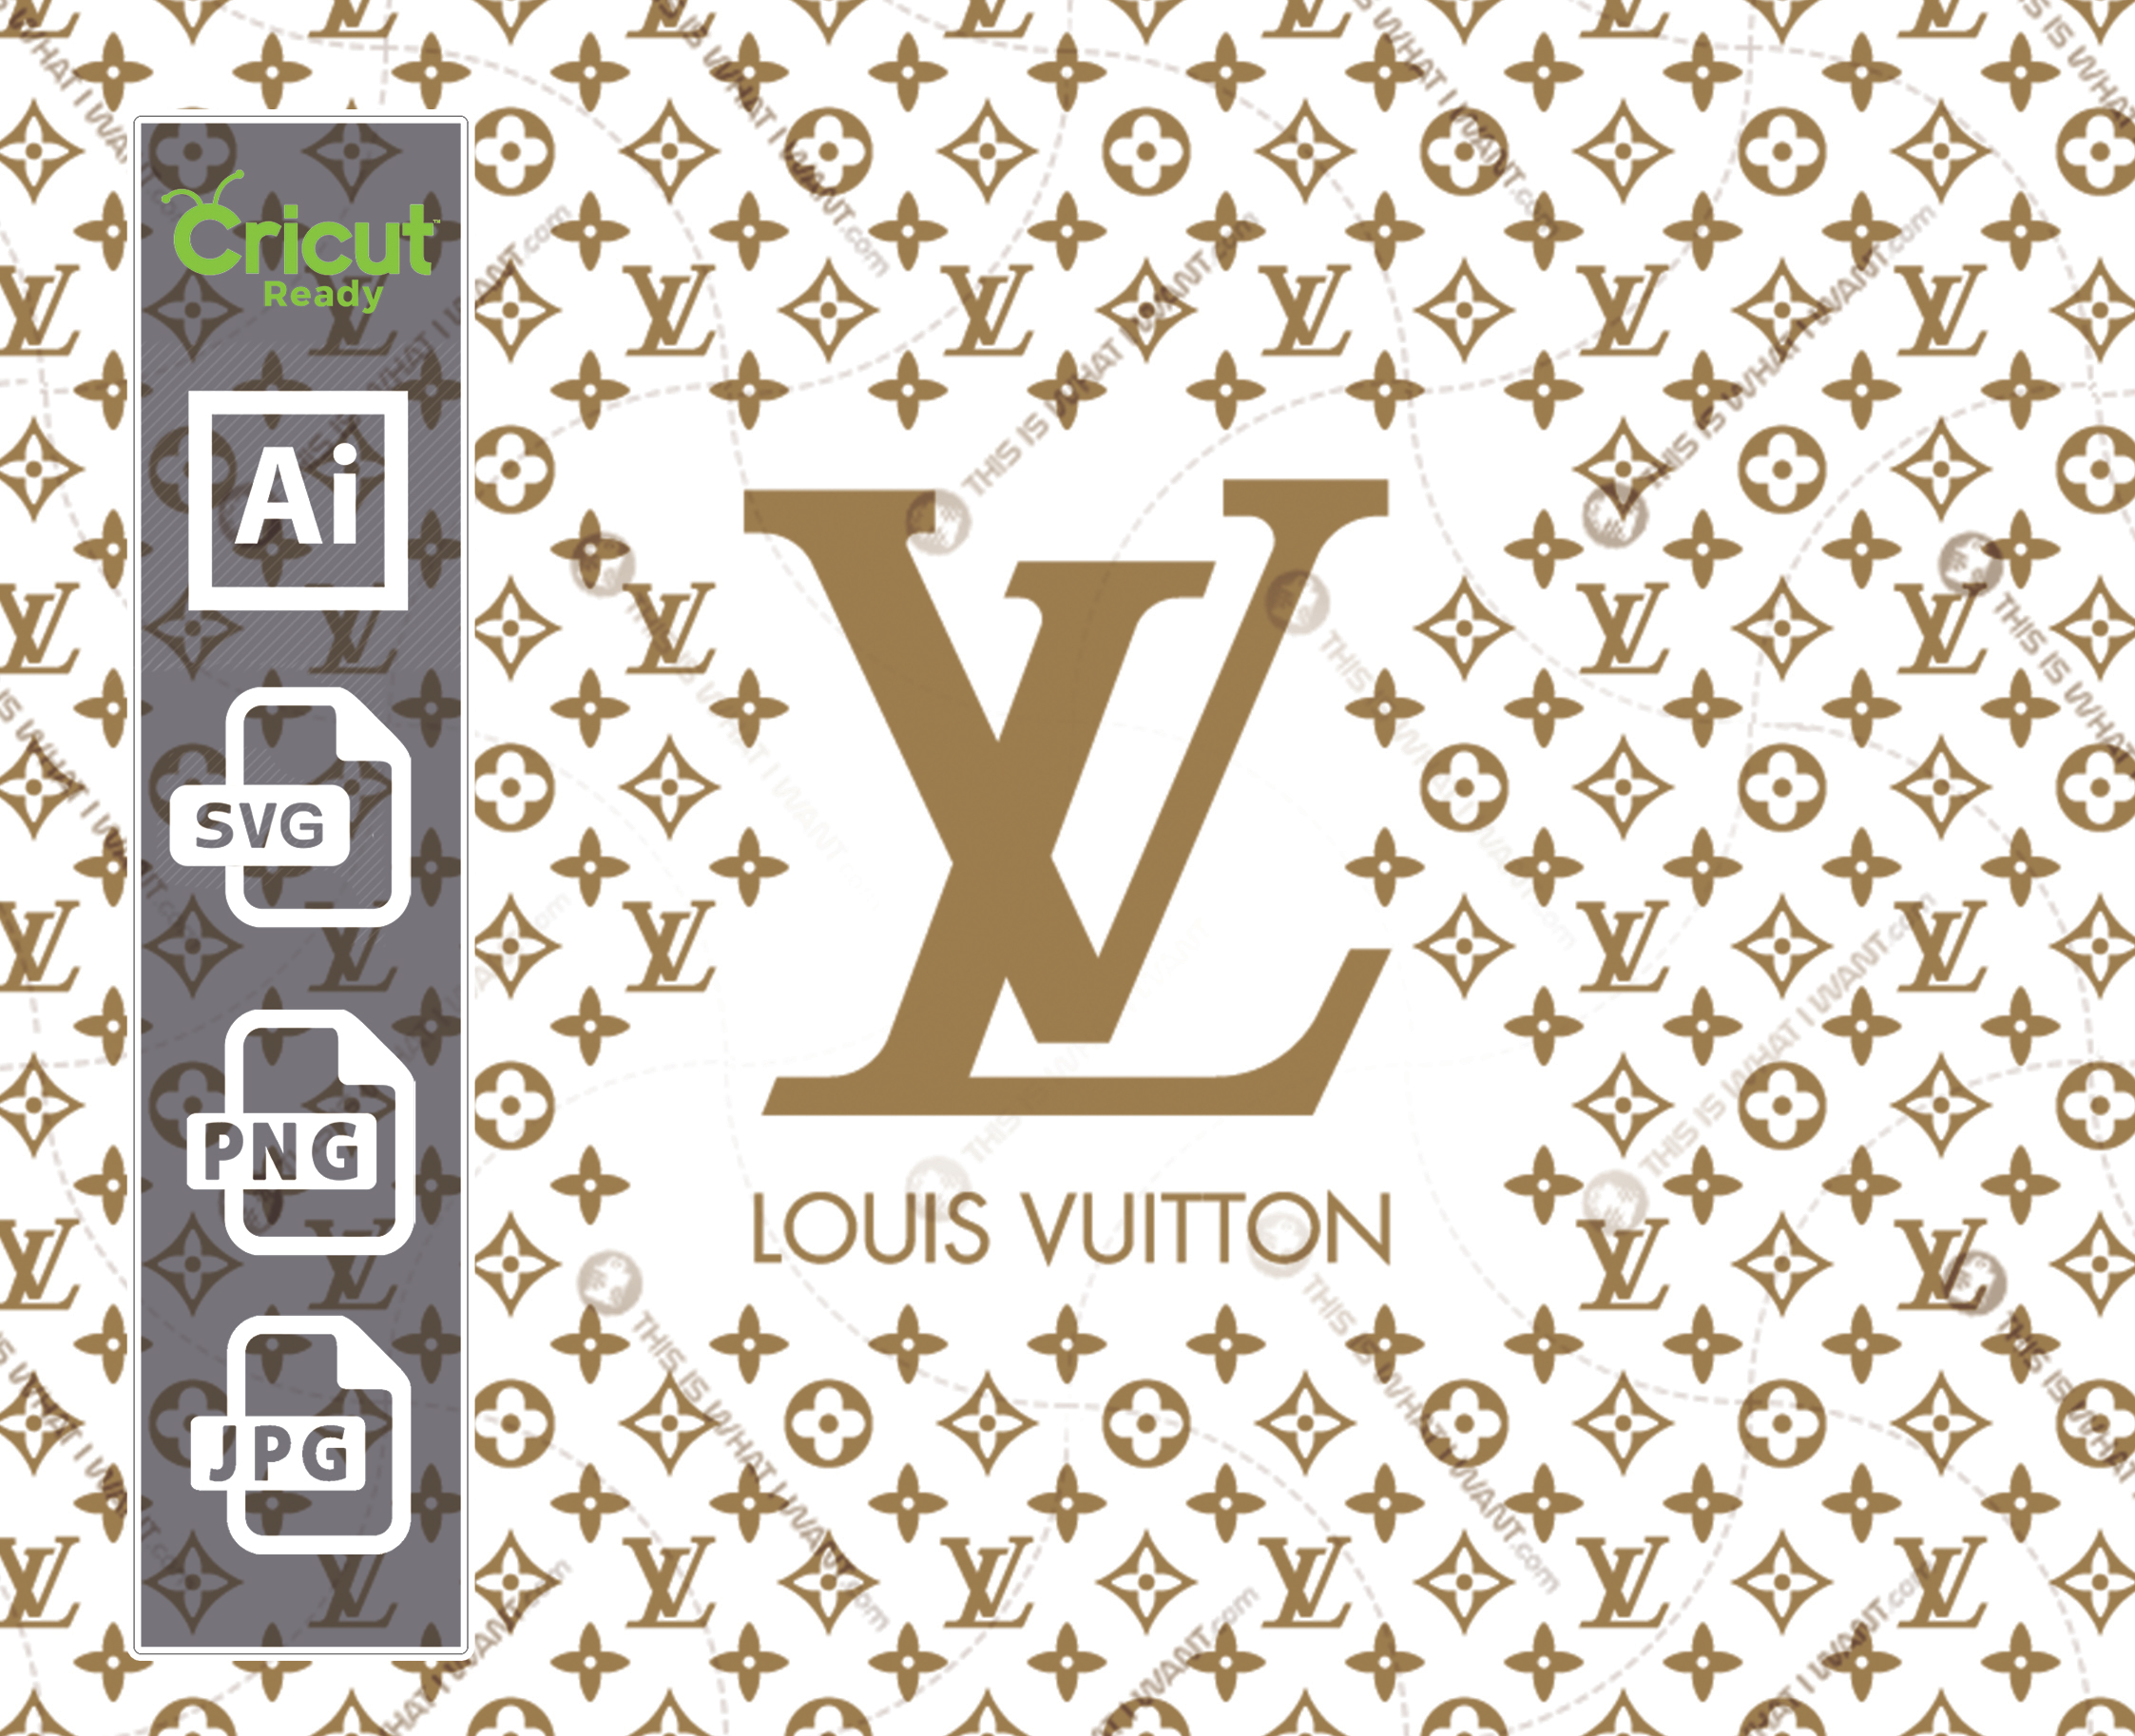 Louis Vuitton Logo + monogram Inspired – Vector Art Design – Hi Quality -  This is What I Want